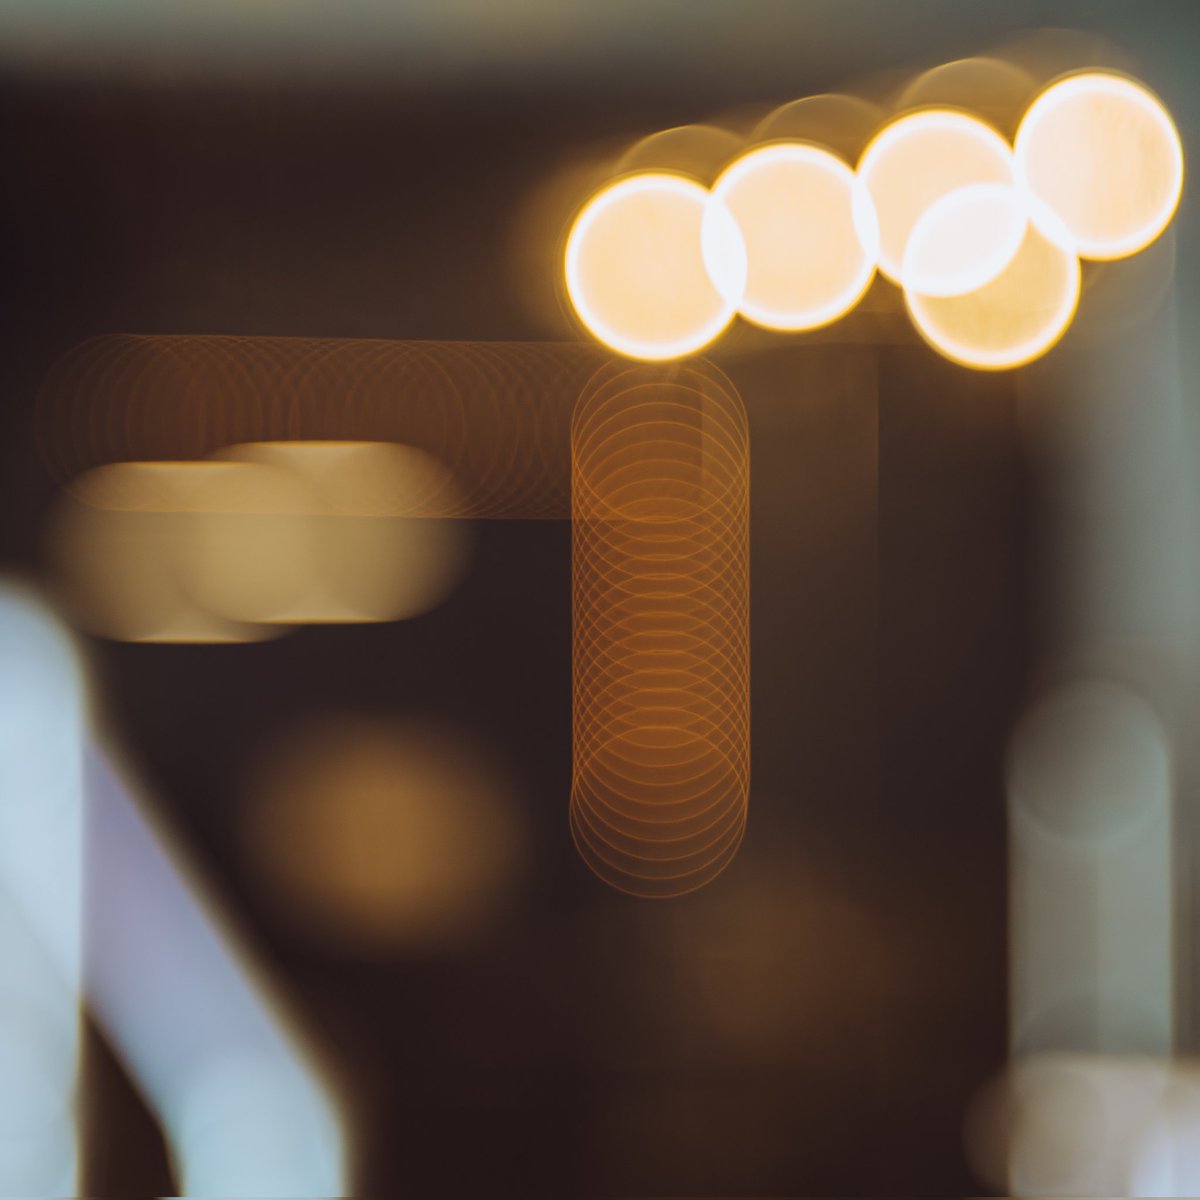 Abstract bokeh art. Me messing around with my new TTartisan 100mm 2.8 trioplan lens, trying out the famed bubble bokeh. Really enjoying it so far, will be interesting to see what results I get when I go full on macro with it. #trioplan #m42 #ttartisan